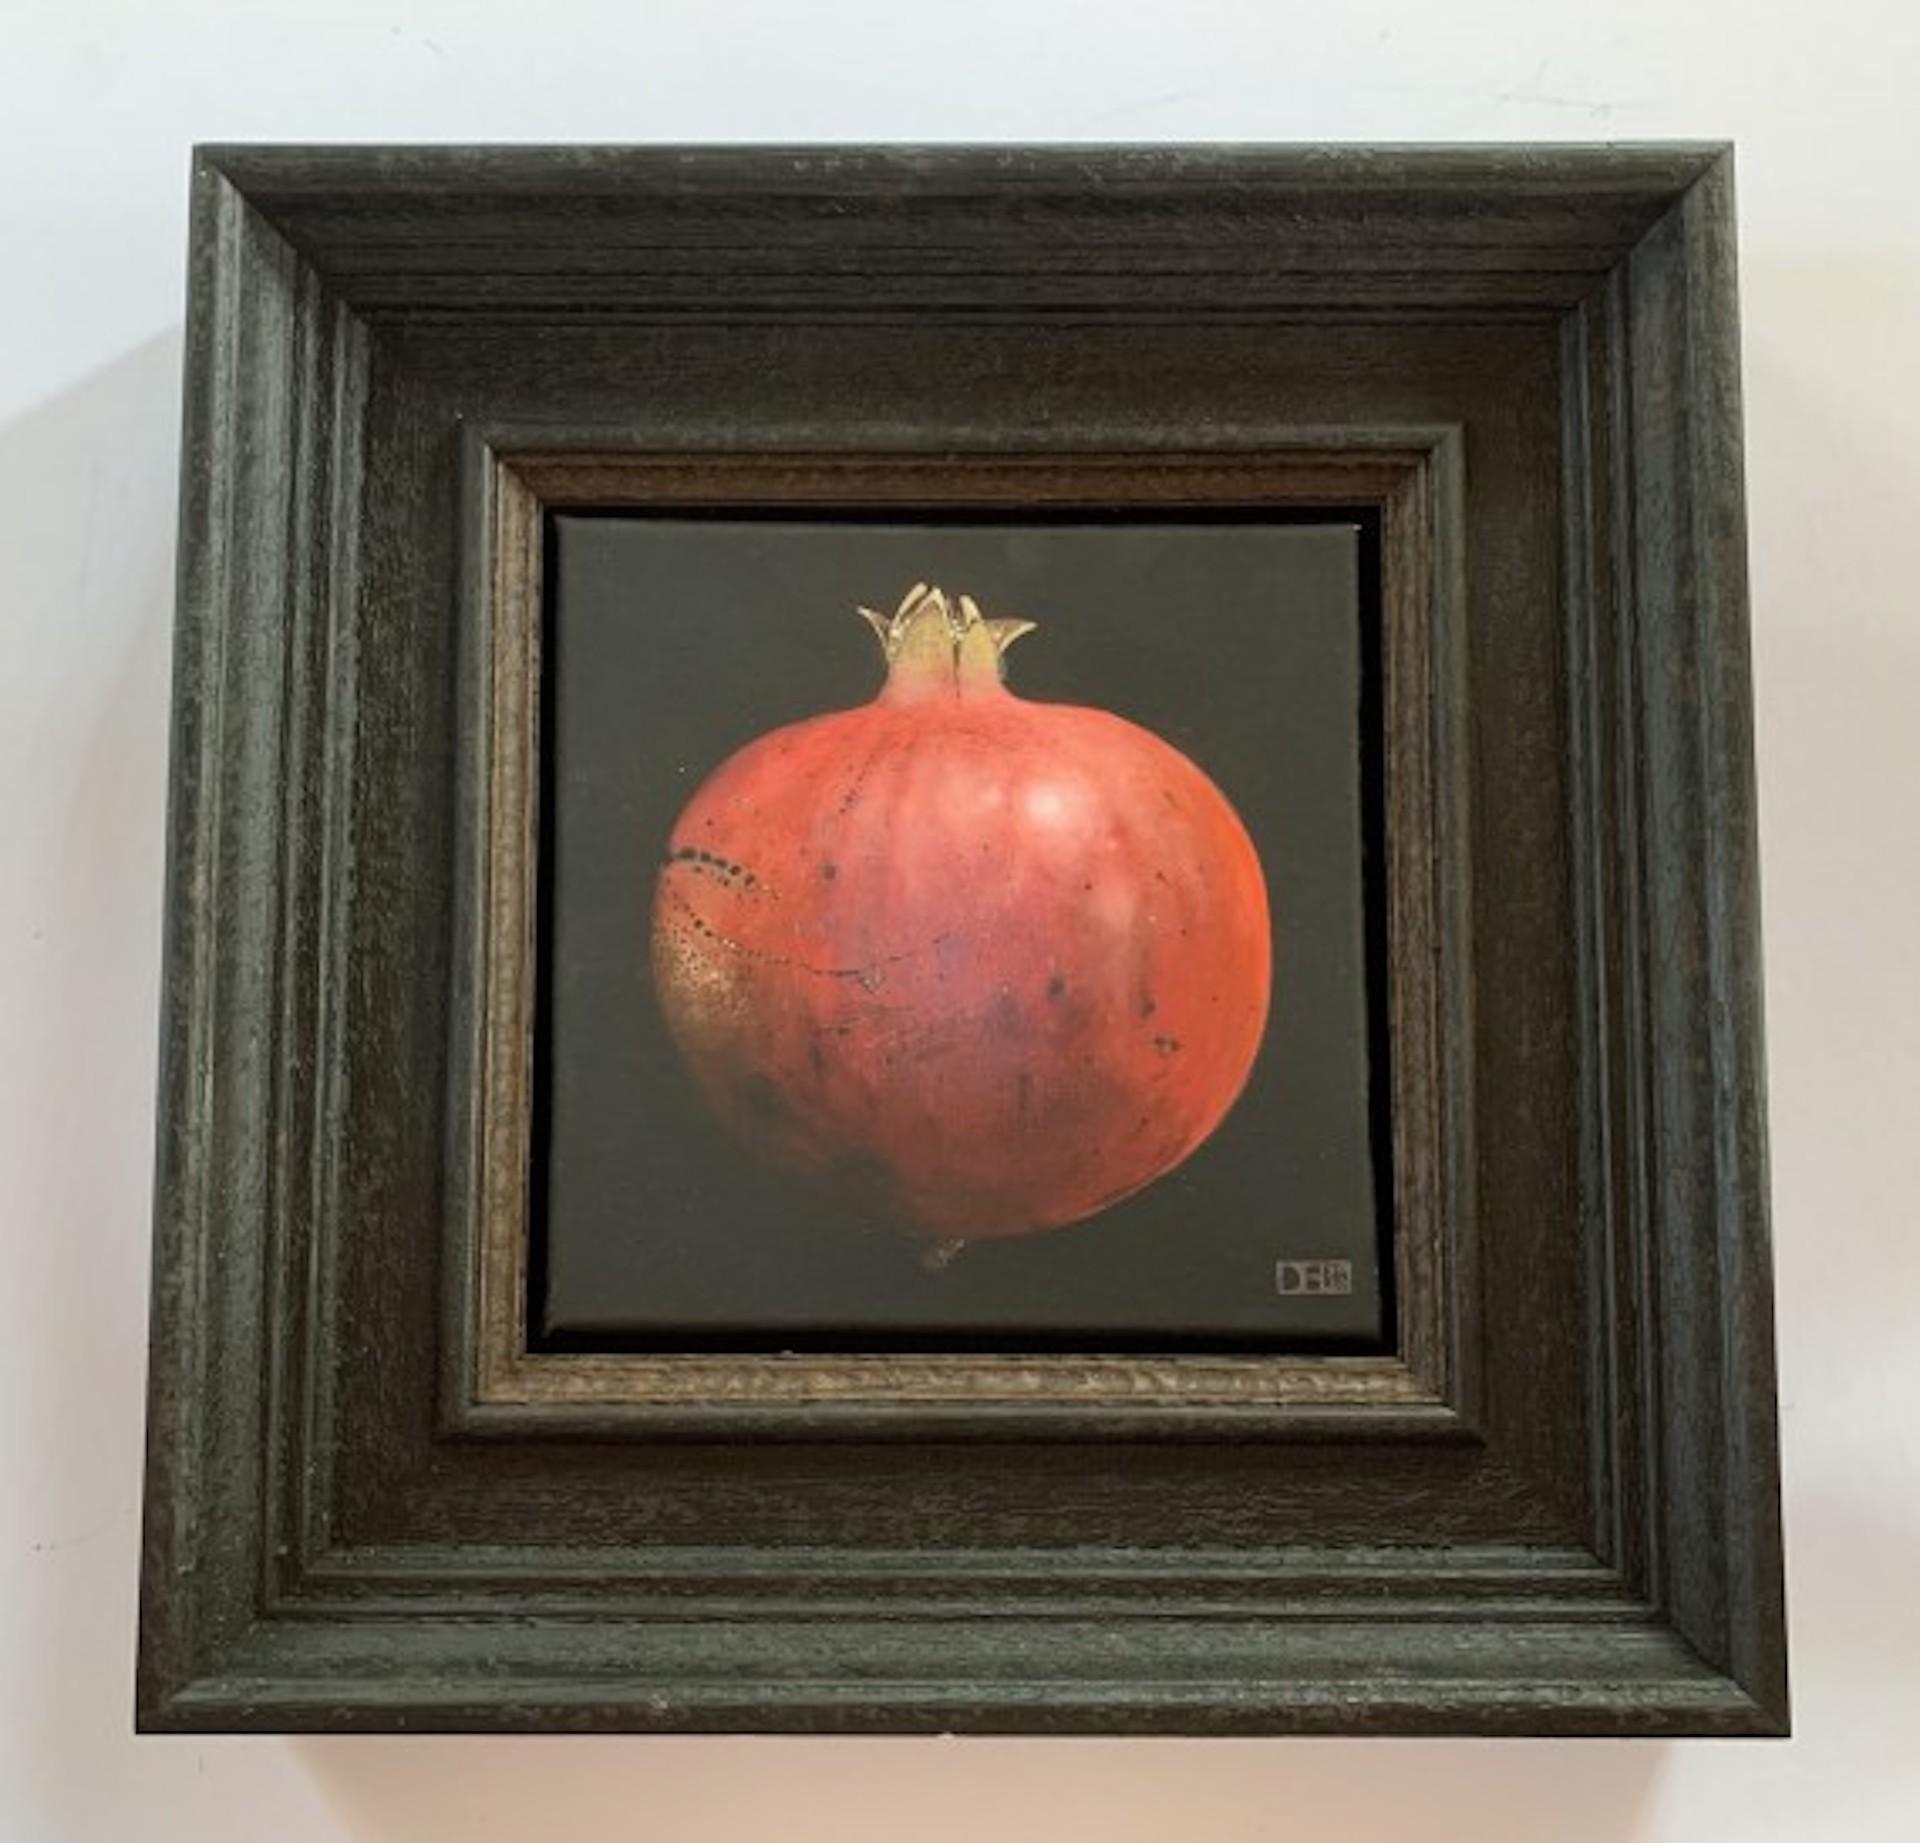 Baroke Red Pomegranate by Dani Humberstone [2021]
Original
Oil Paint on Canvas
Image size: H:19.5 cm x W:19.5 cm
Complete Size of Unframed Work: H:19.5 cm x W:19.5 cm x D:4cm
Framed Size: H:35.5 cm x W:35.5 cm x D:5cm
Sold Framed
Please note that